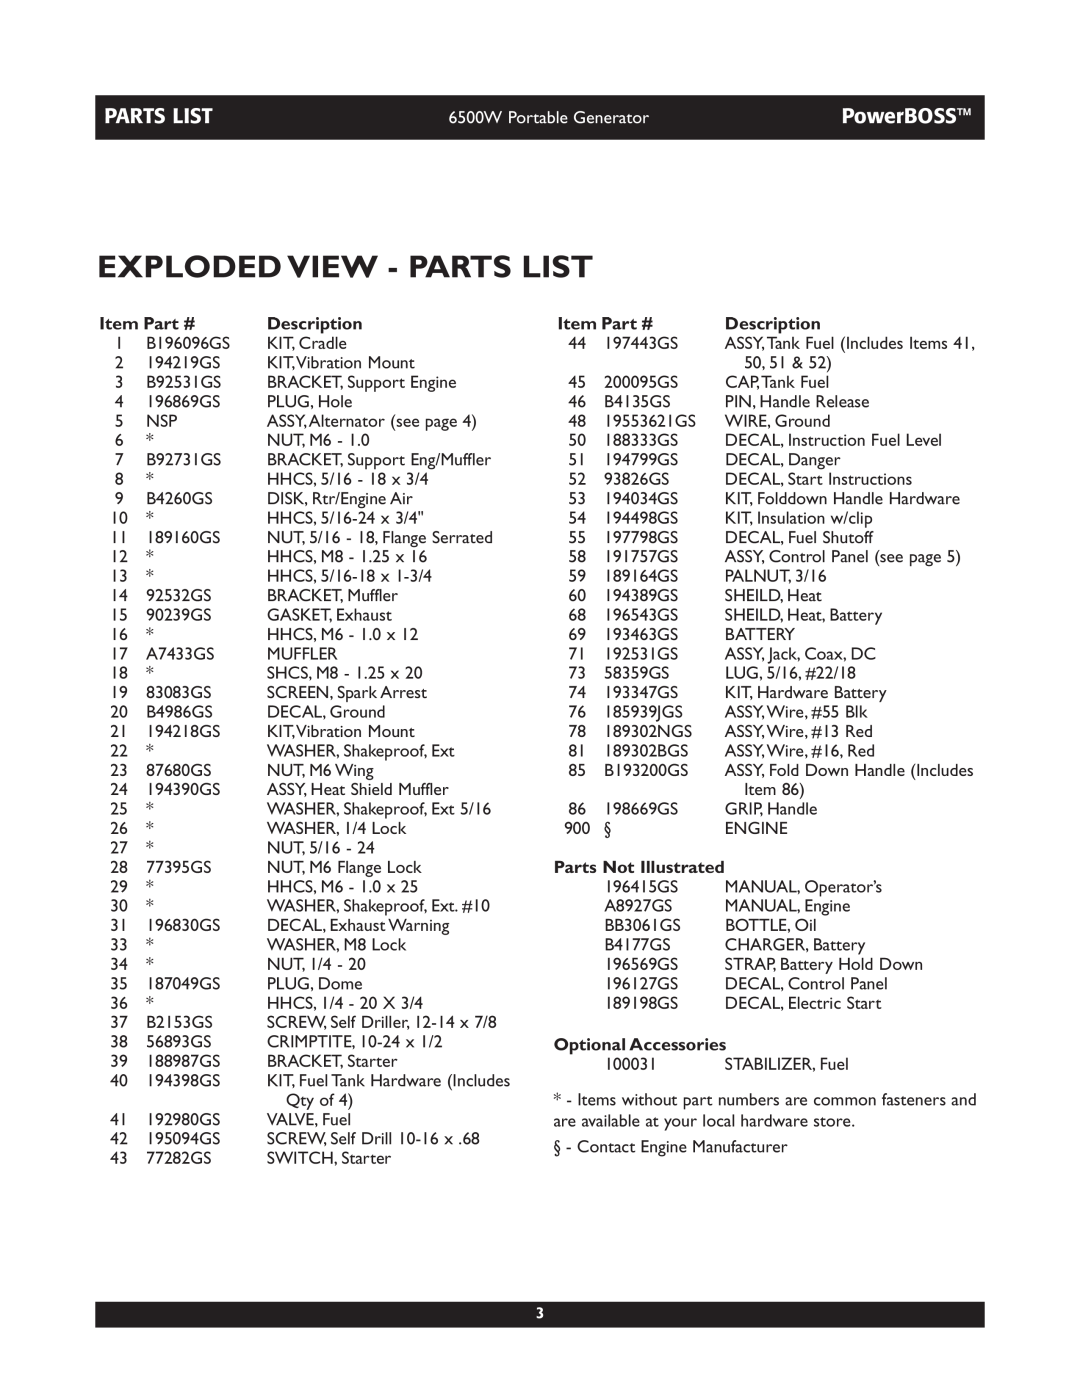 Briggs & Stratton 030227 Exploded View - Parts List, Description, Parts Not Illustrated, Optional Accessories, PowerBOSS 